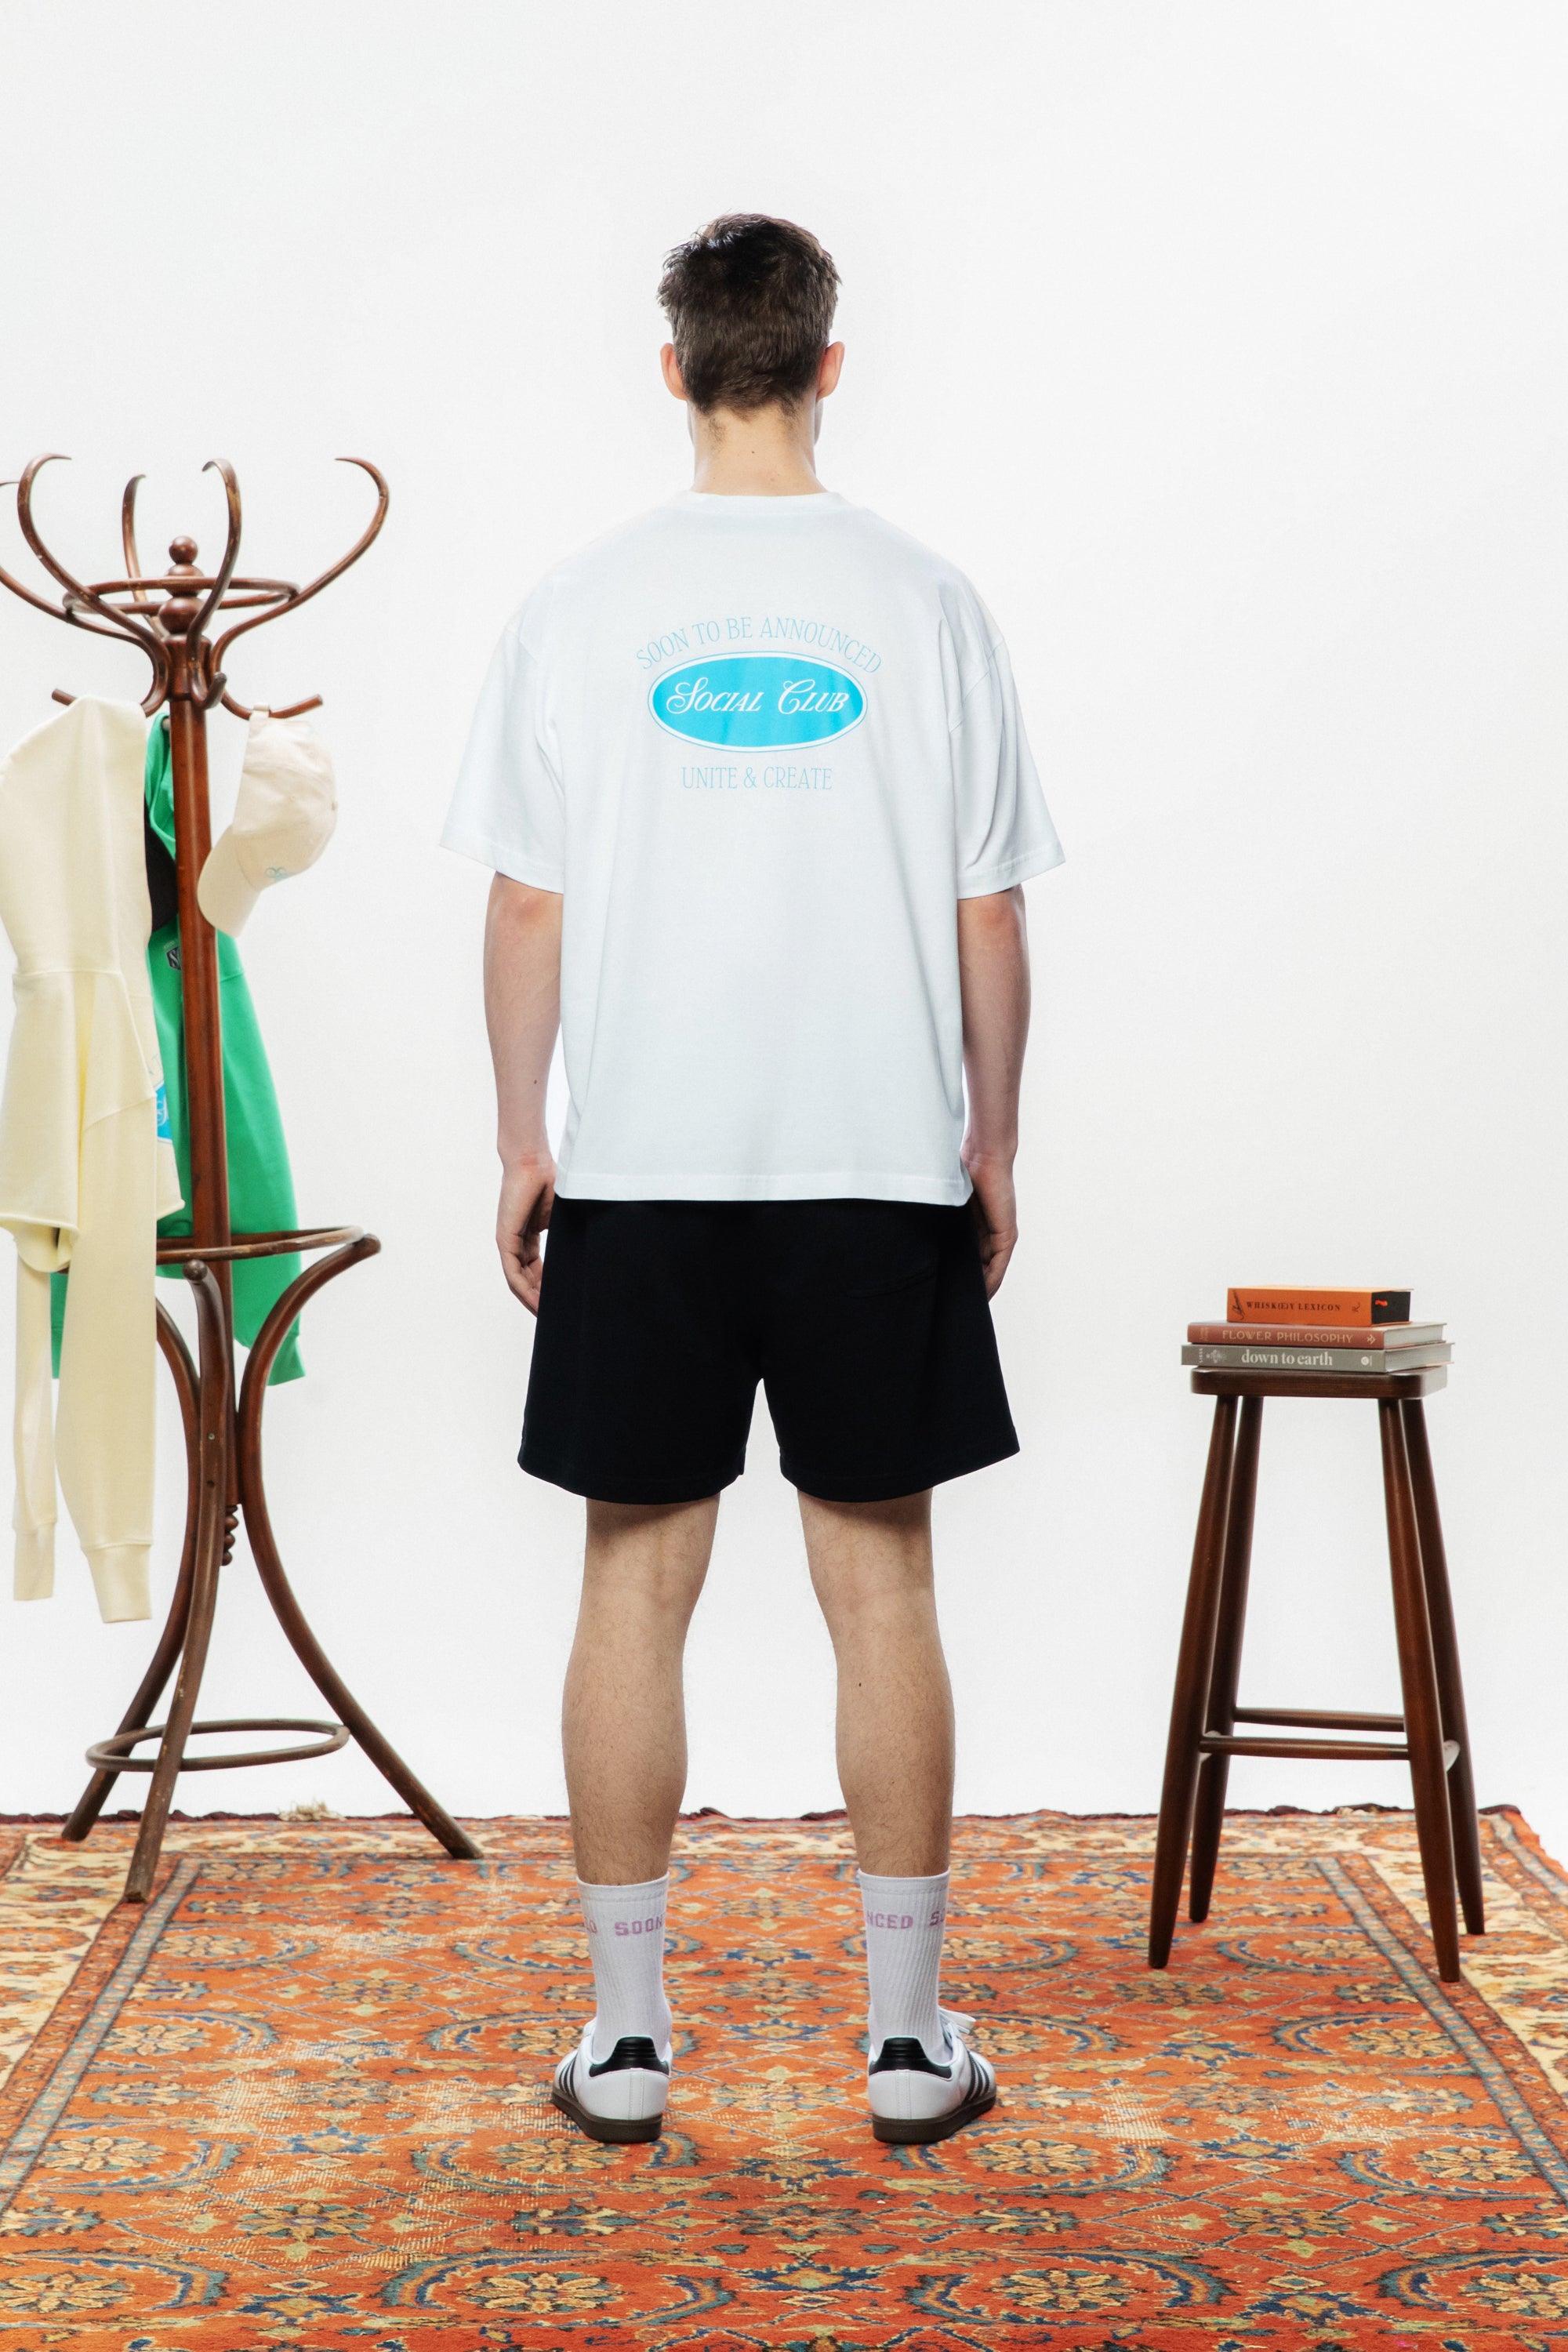 Social Club Oversized T-Shirt - SOON TO BE ANNOUNCED